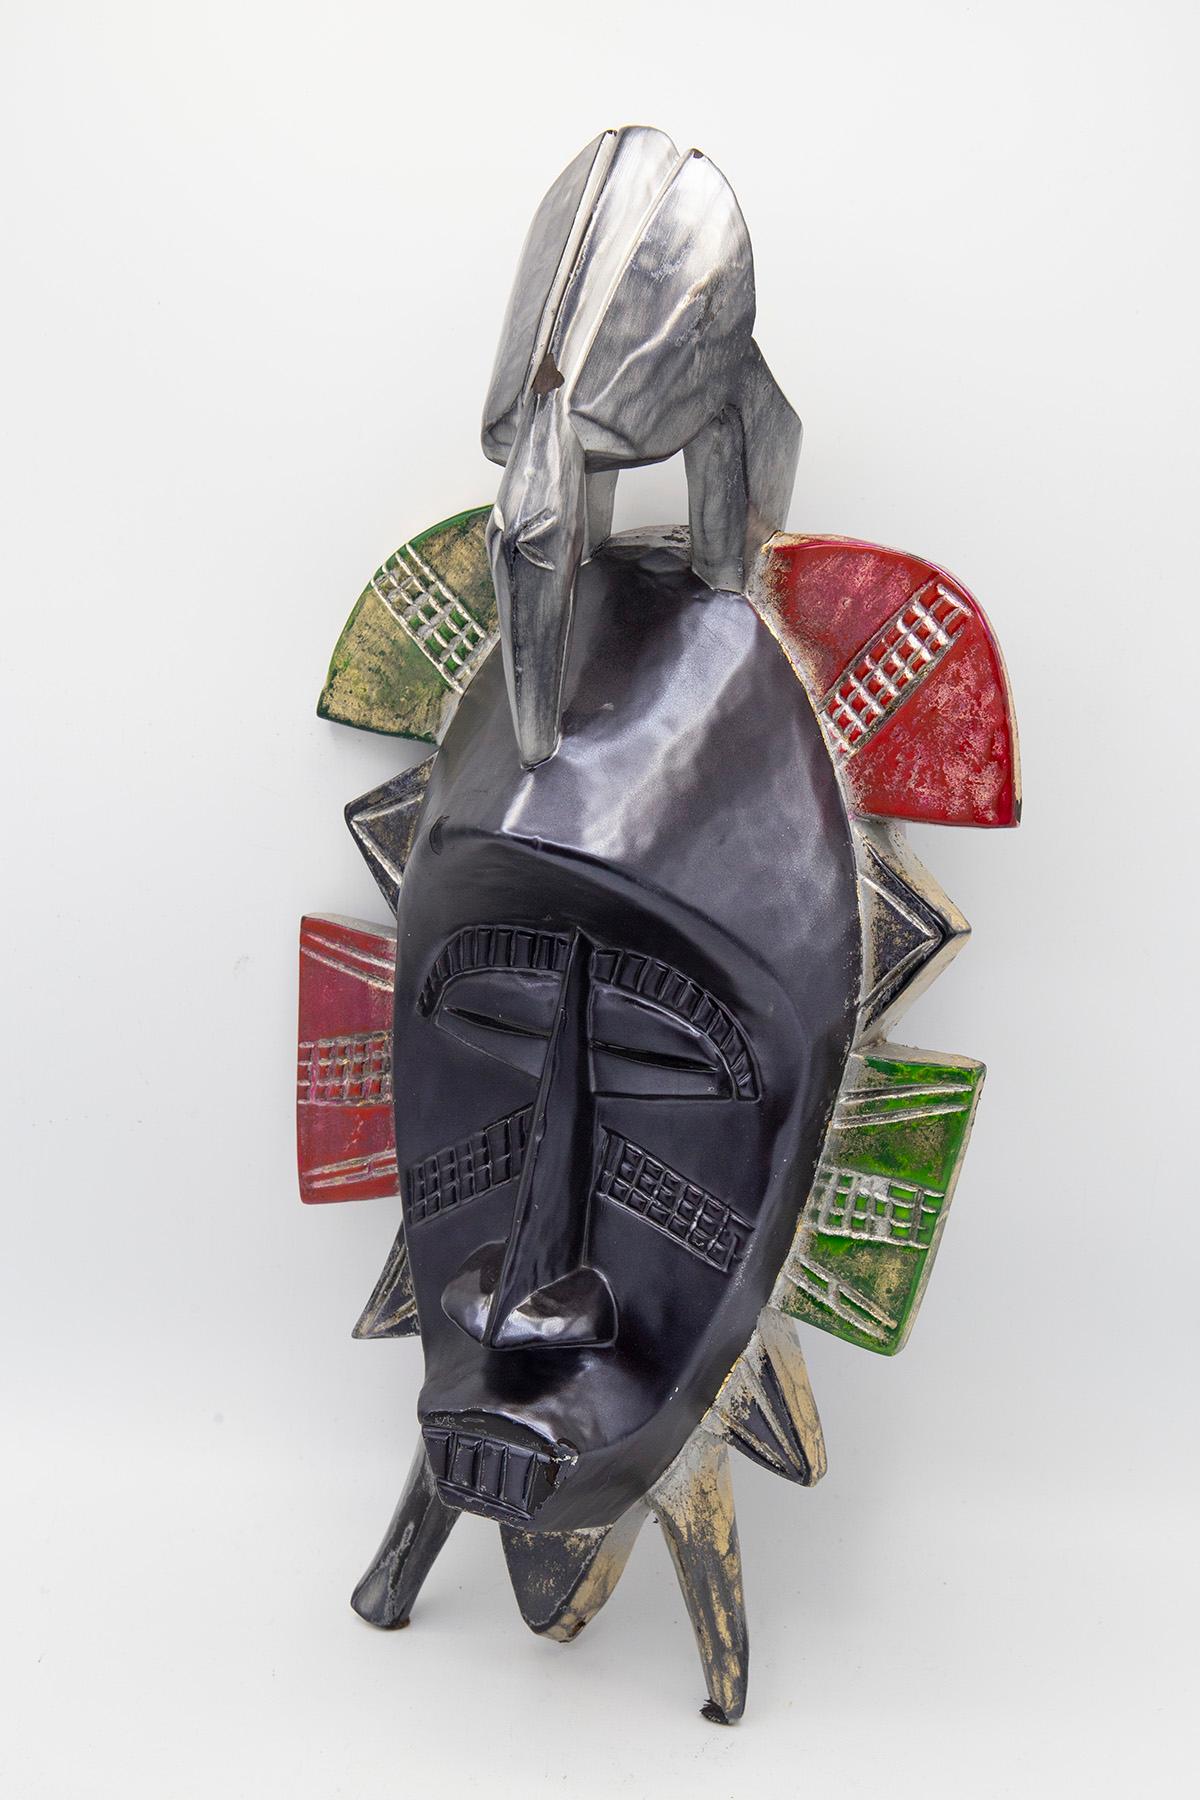 Contemporary African single mask created by the artist Bomber Bax.
The mask dates back to the early 1900s and was subsequently processed and painted in late 2022 by the artist.
The artist used special metallic paints to evoke a lunar effect and